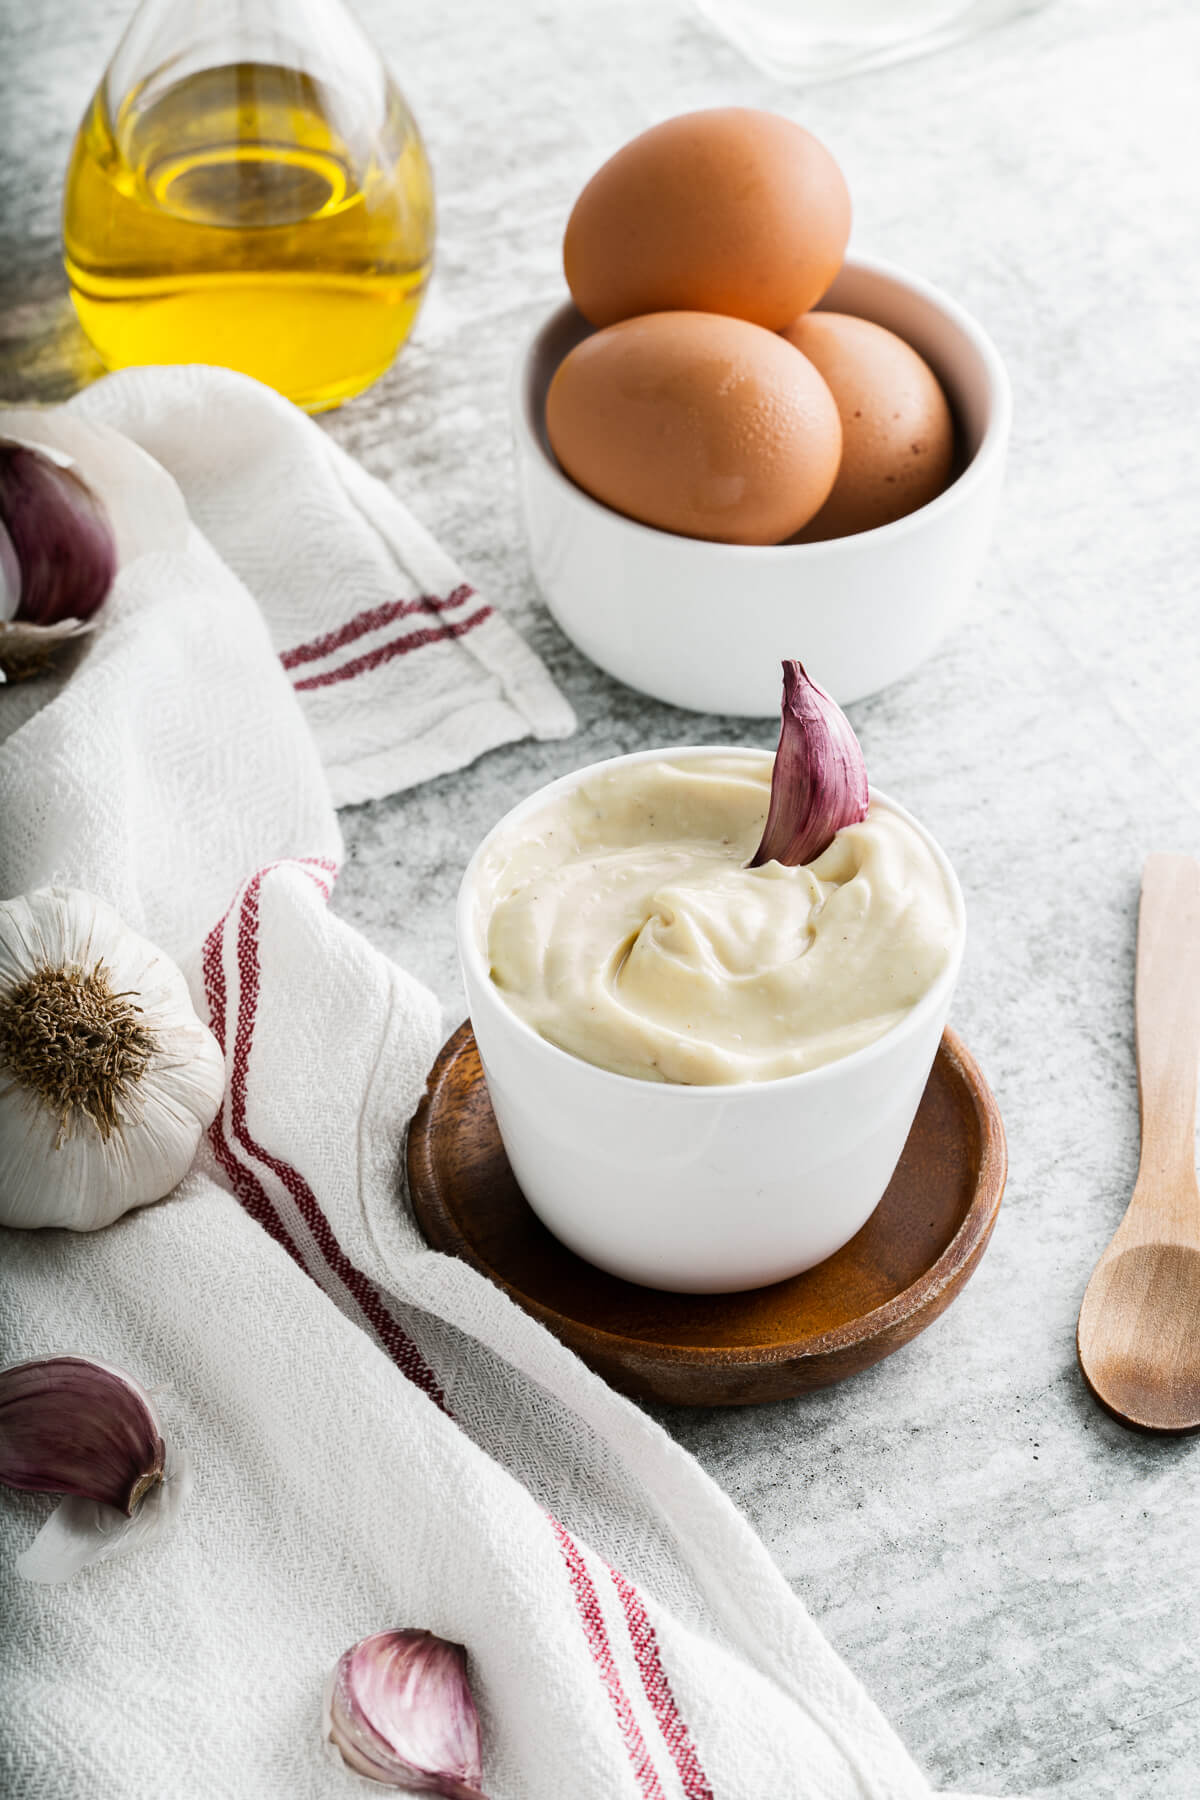 A small white dish filled with creamy Homemade Aioli garnished with a purple clove of garlic. Surrounded by aioli ingredients.